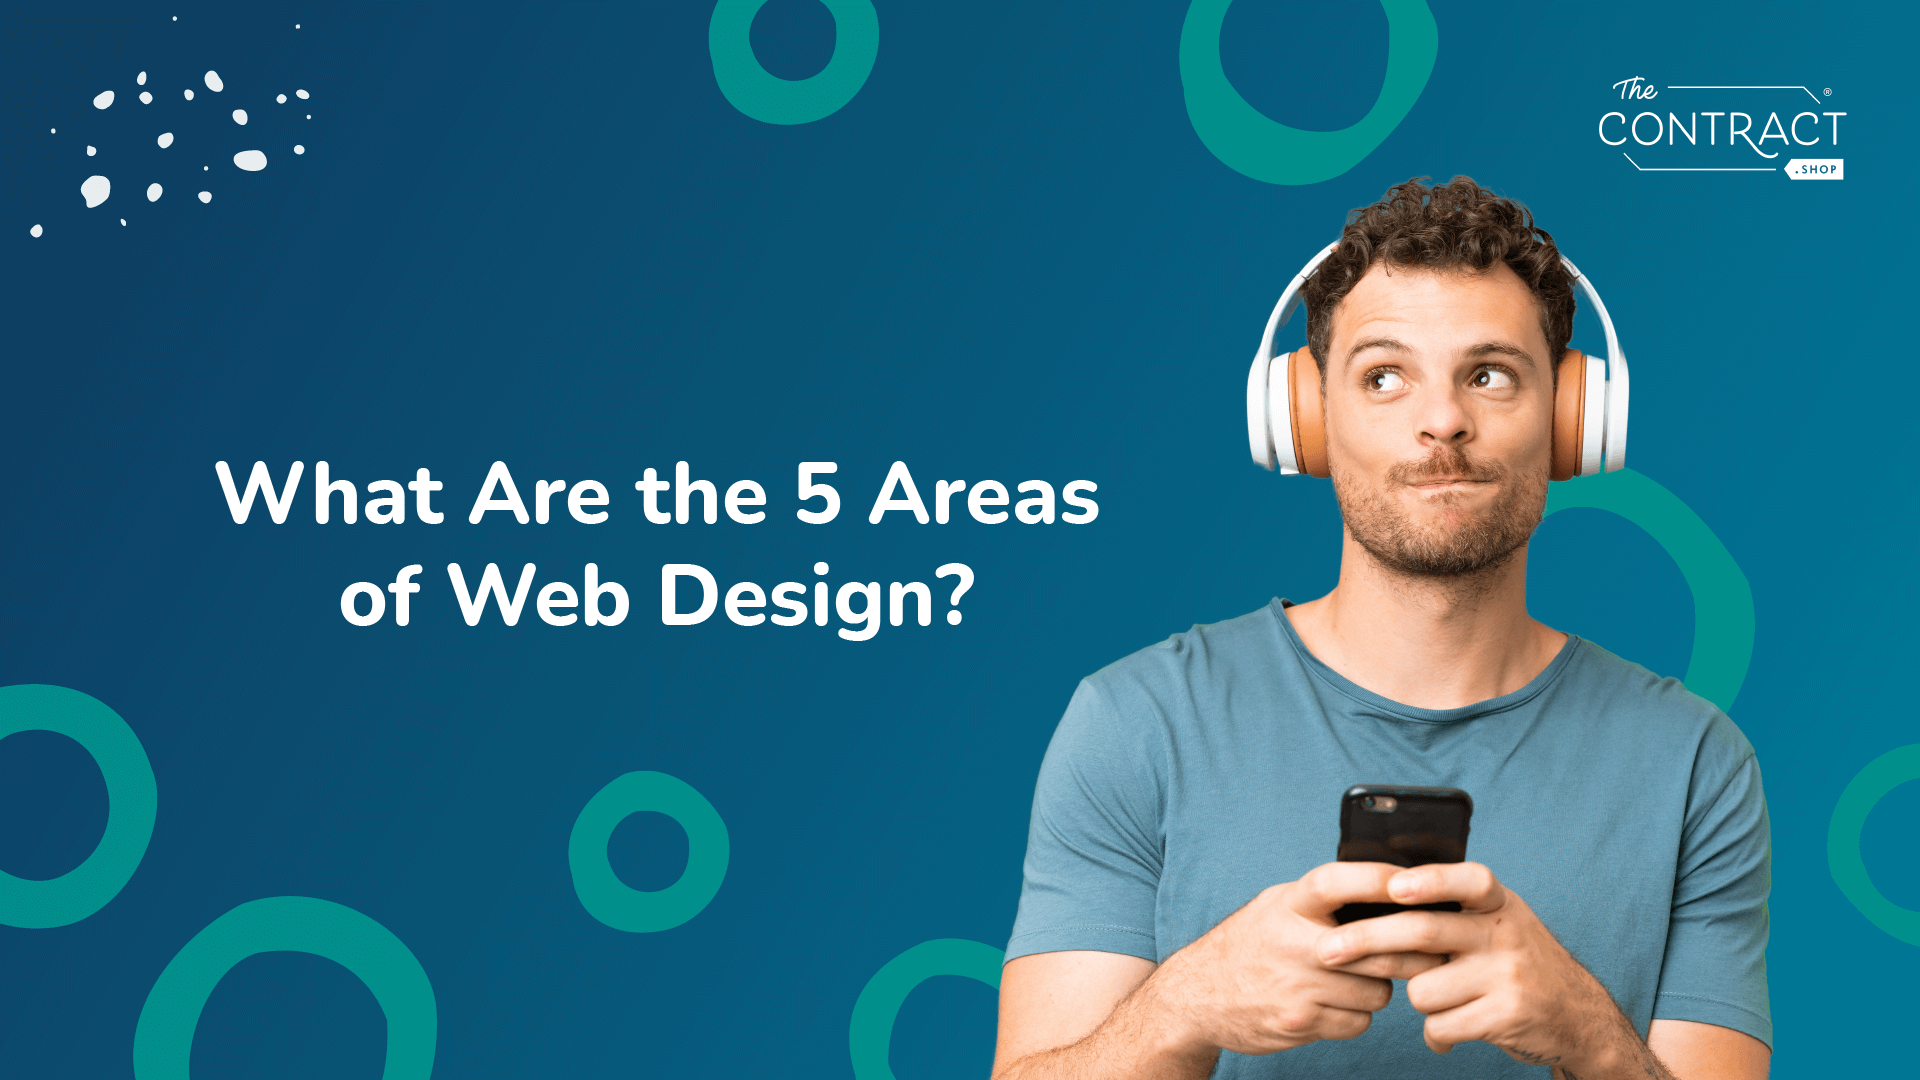 What Are the 5 Areas of Web Design?